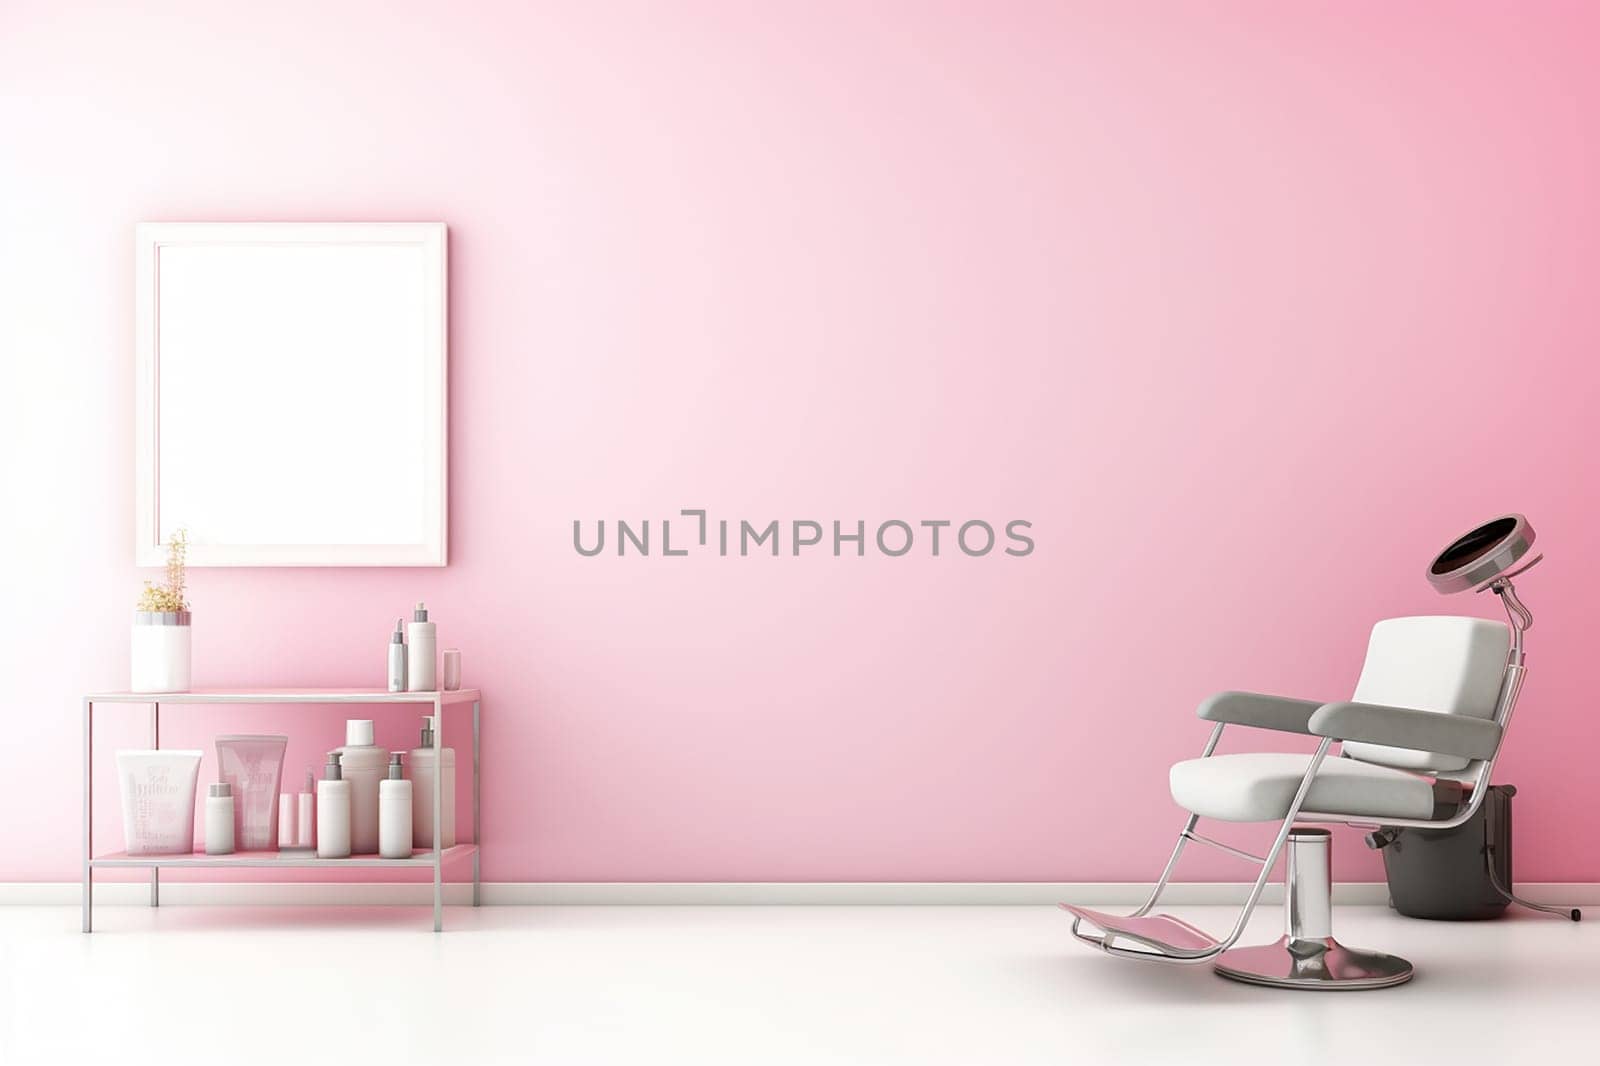 Modern salon interior with chair, table, and beauty products on pink wall background. by Hype2art